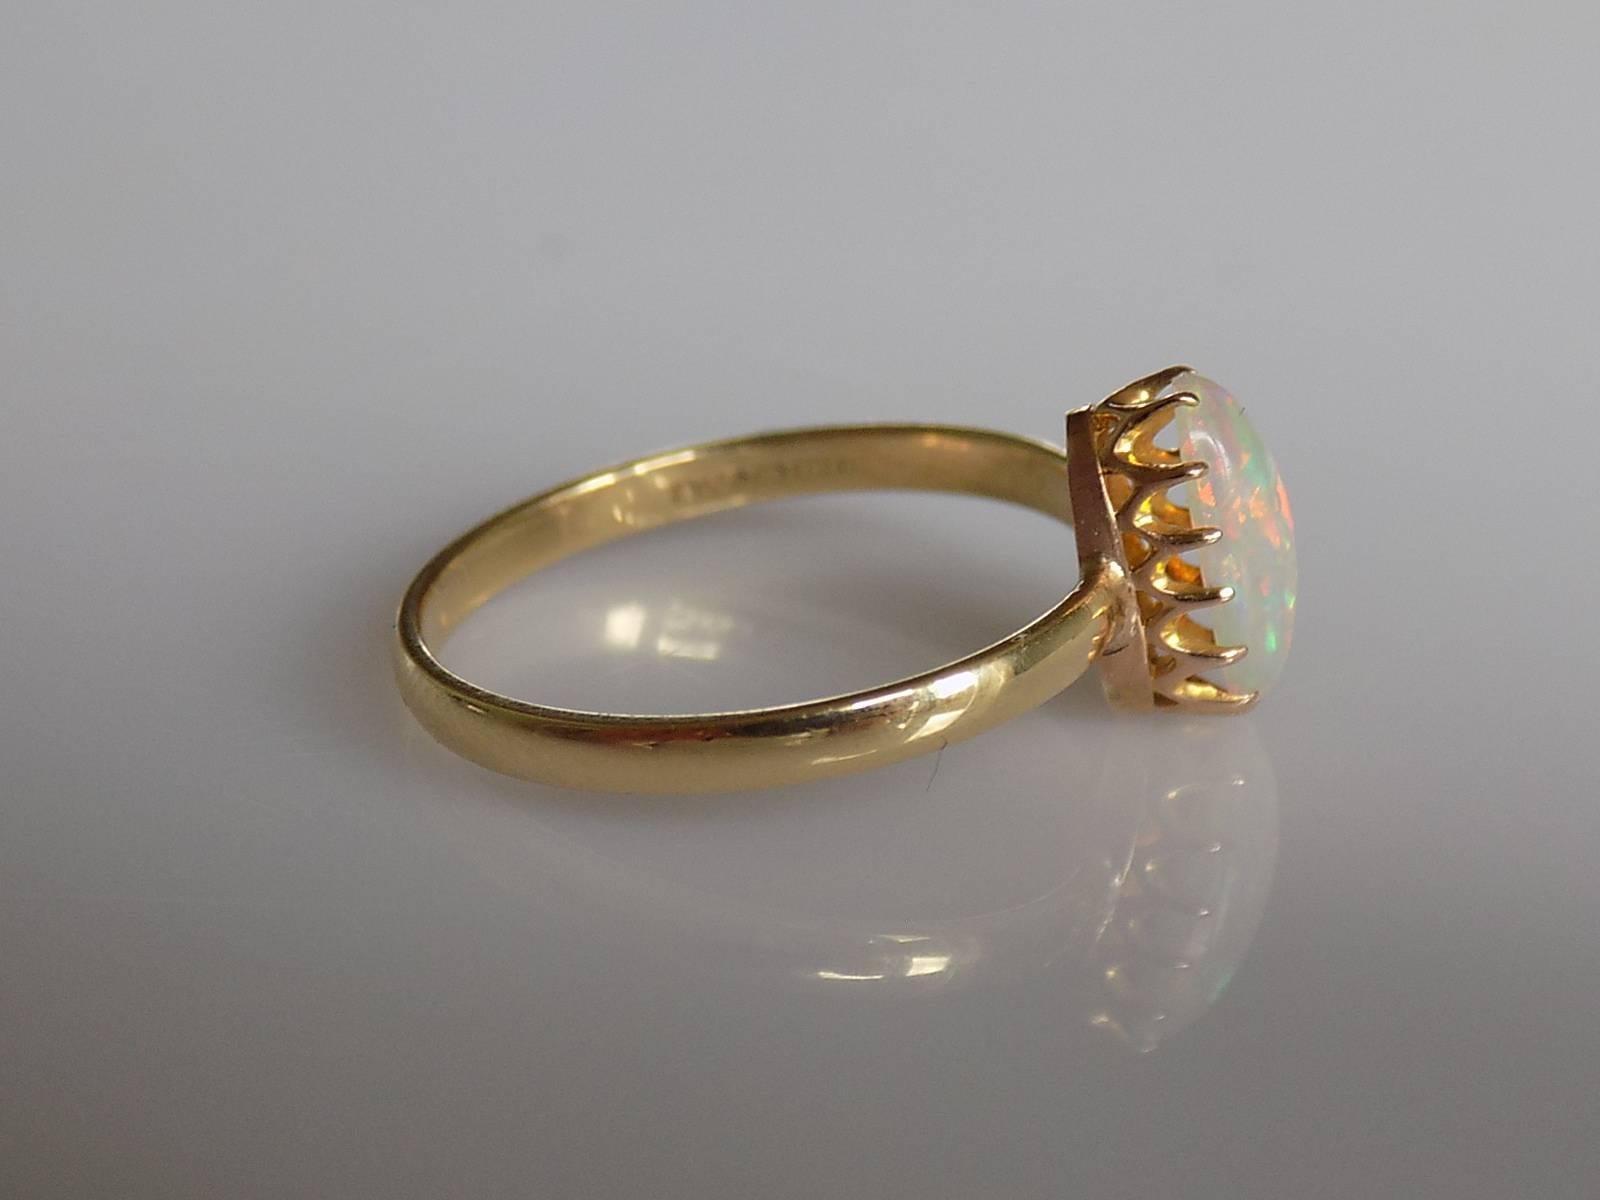 A Beautiful Victorian Fine quality Australian Opal stick pin conversion ring. The Opal in a crown style claw setting on a later 18 Carat Gold shank. English origin.
Size Q UK, 8.5 US can be sized.
Opal 10mm x 5.5mm.
Weight 2.2gr.
London hallmark for